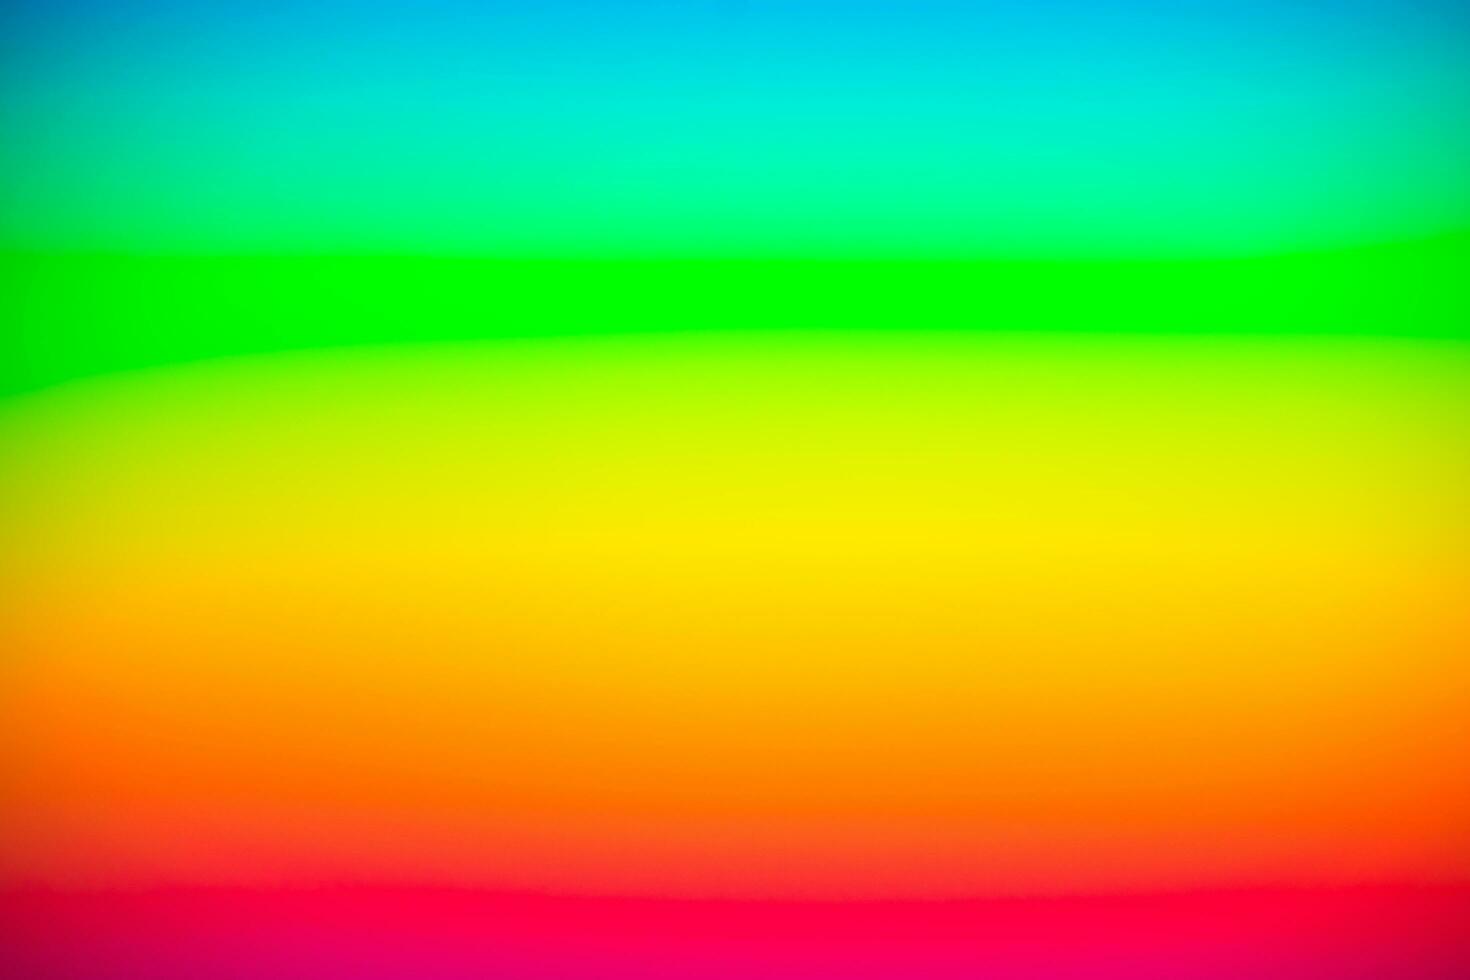 Lesbian, gay, bisexual, and transgender rainbow background photo